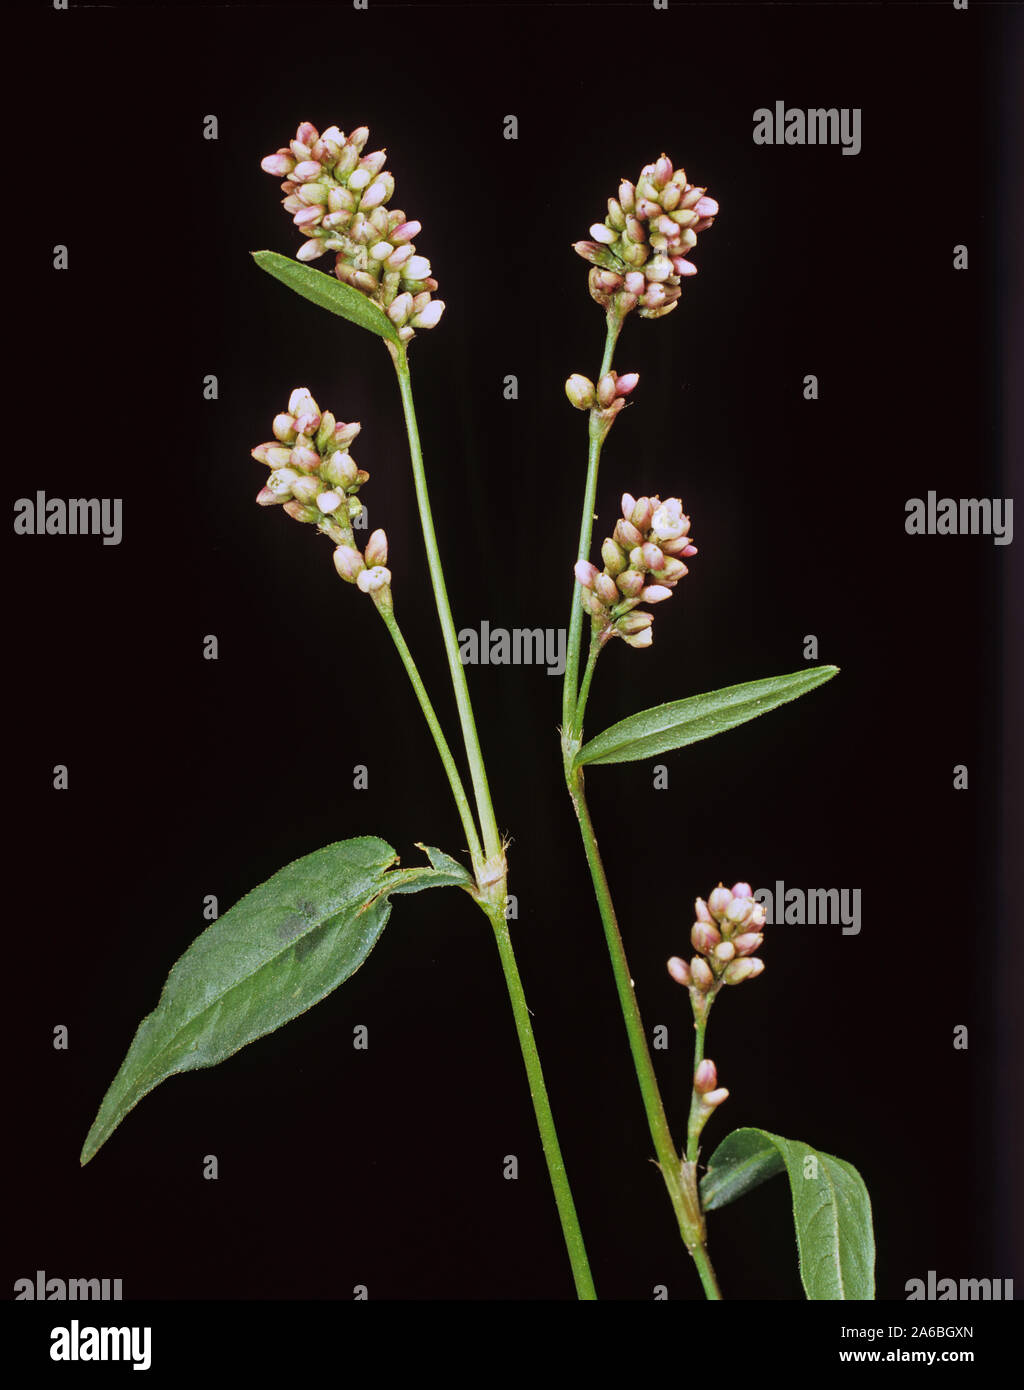 Redshank (Persicaria maculosa) pink flowers from an important annual weed against a black background Stock Photo